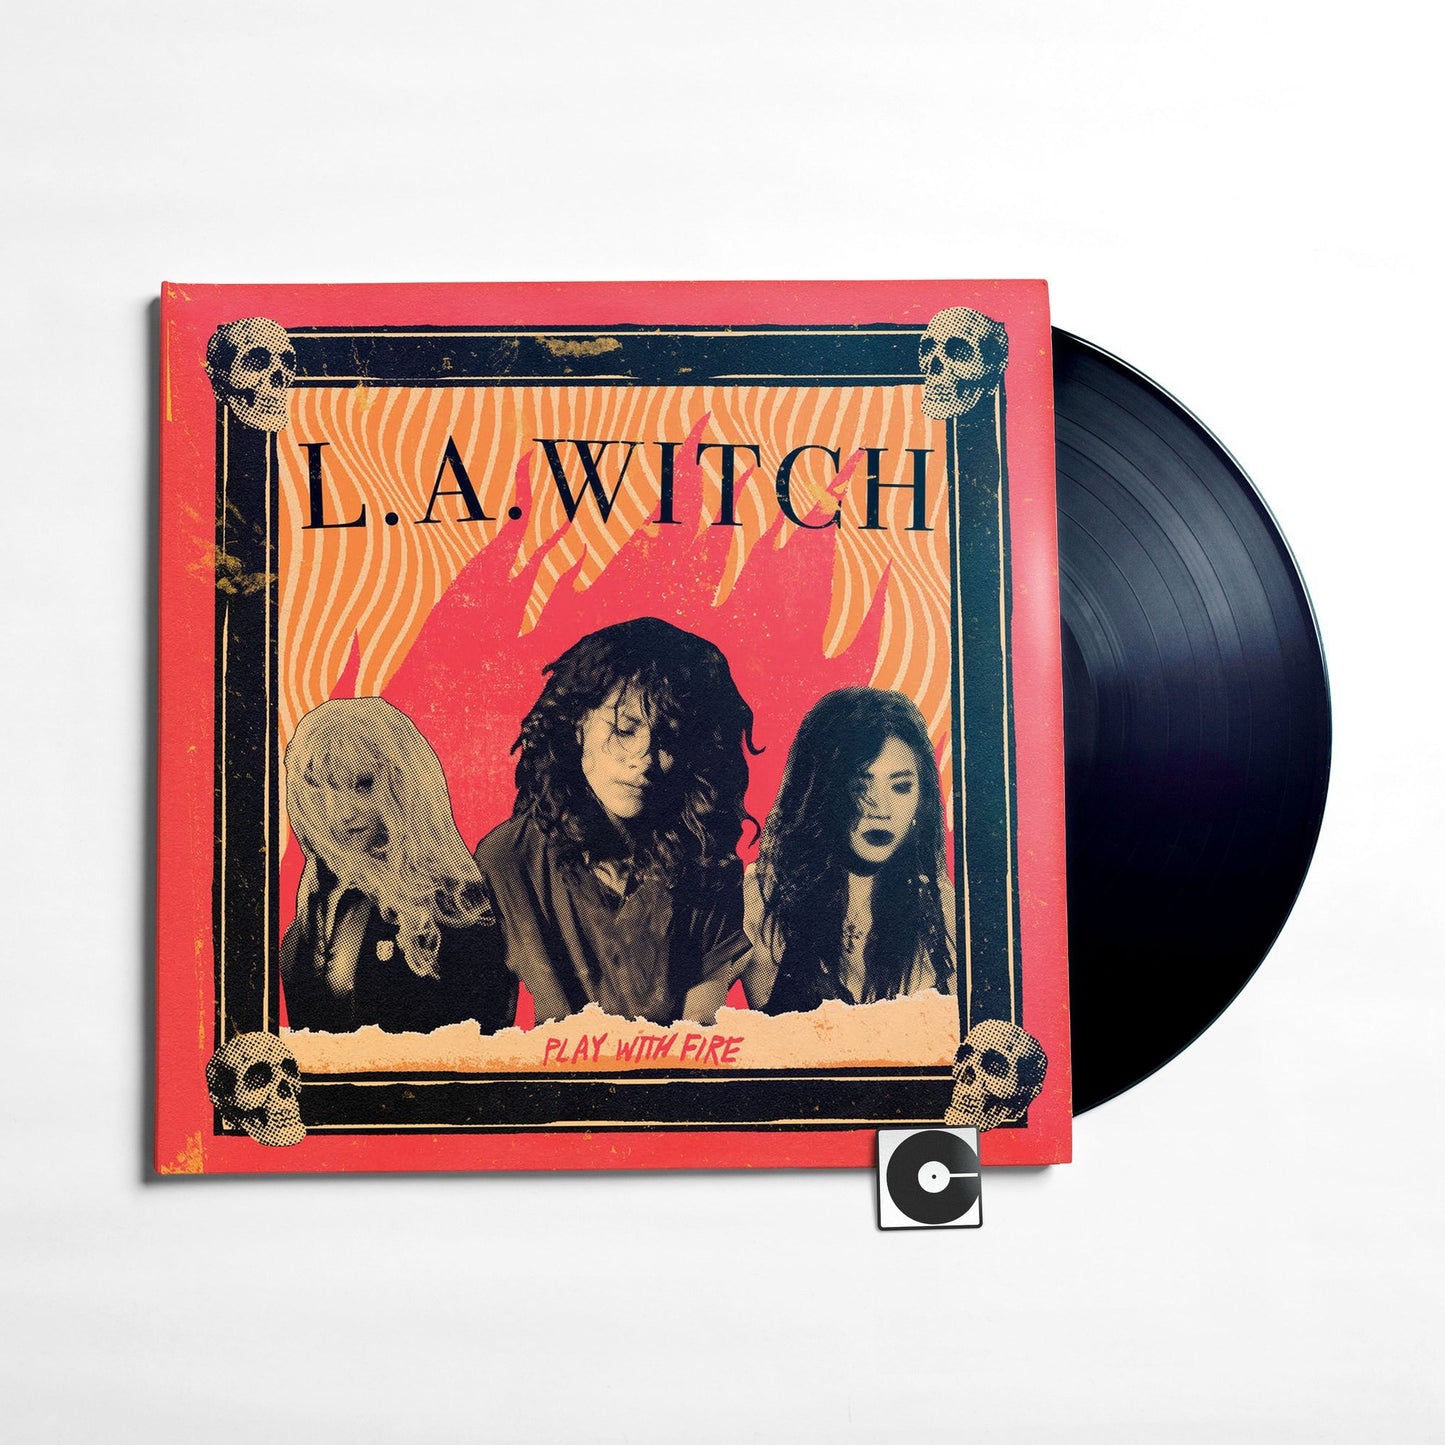 L.A. Witch - "Play With Fire"